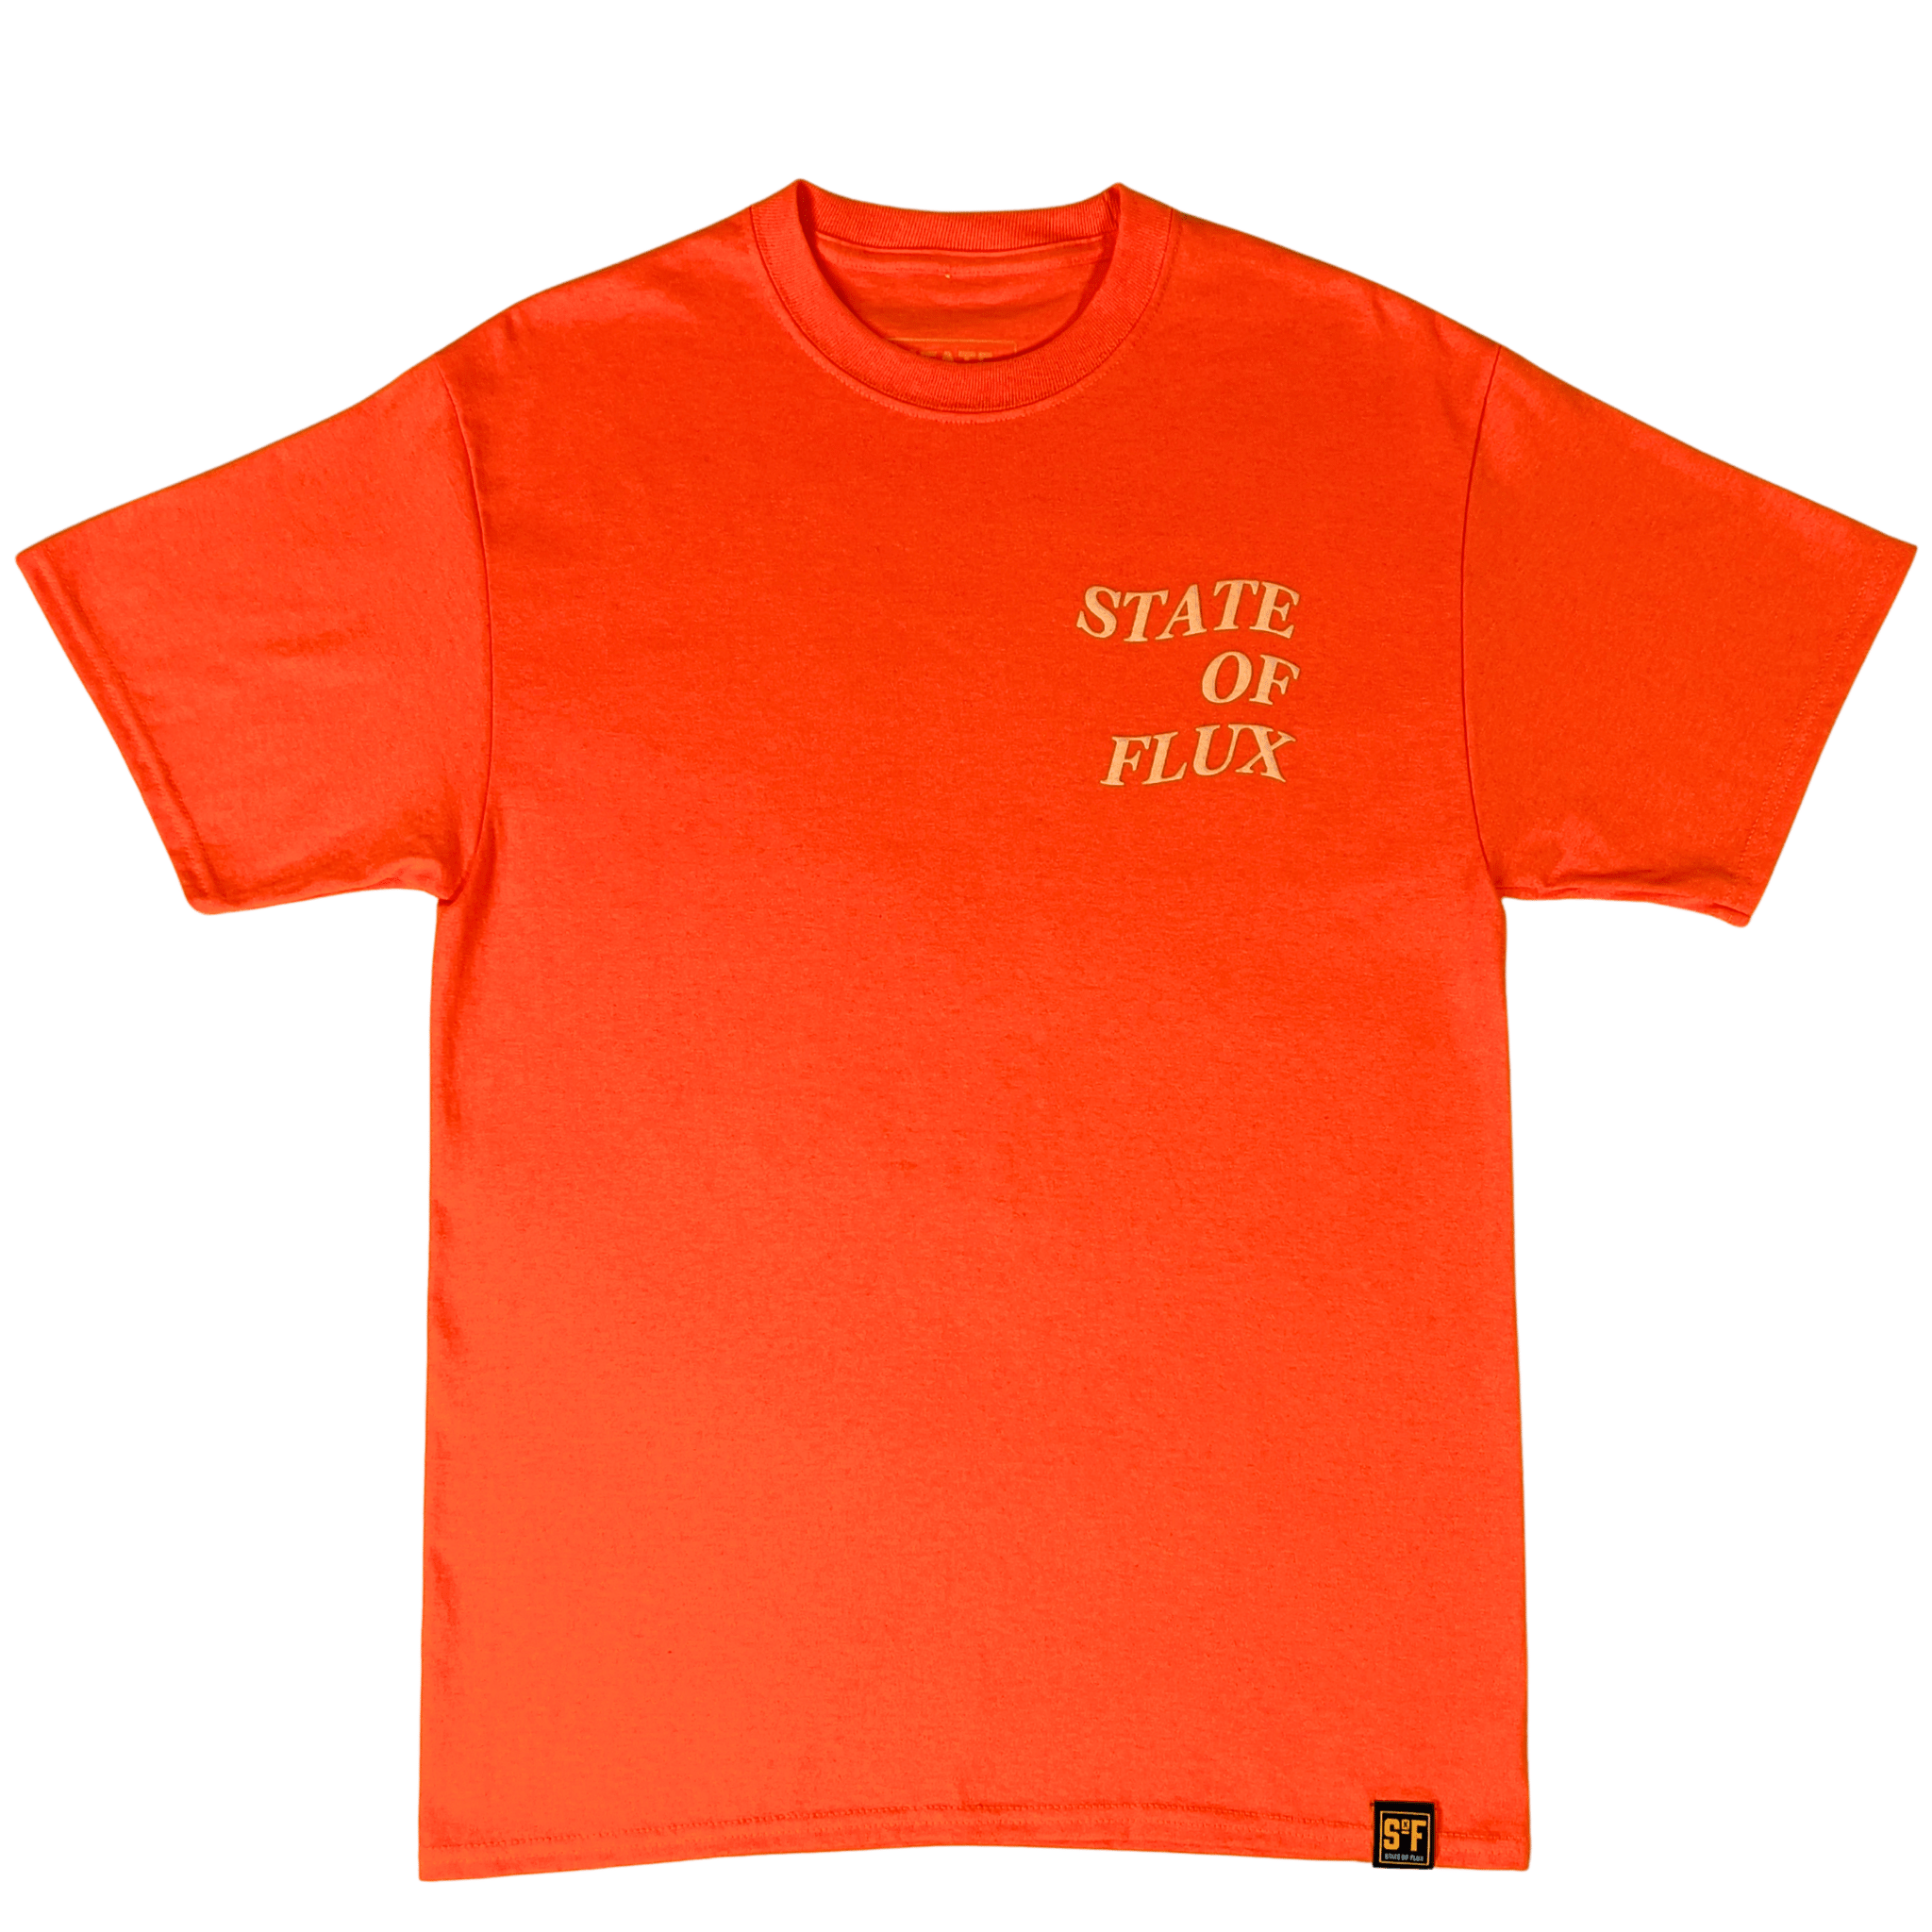 Today Is The Day Tee in neon orange